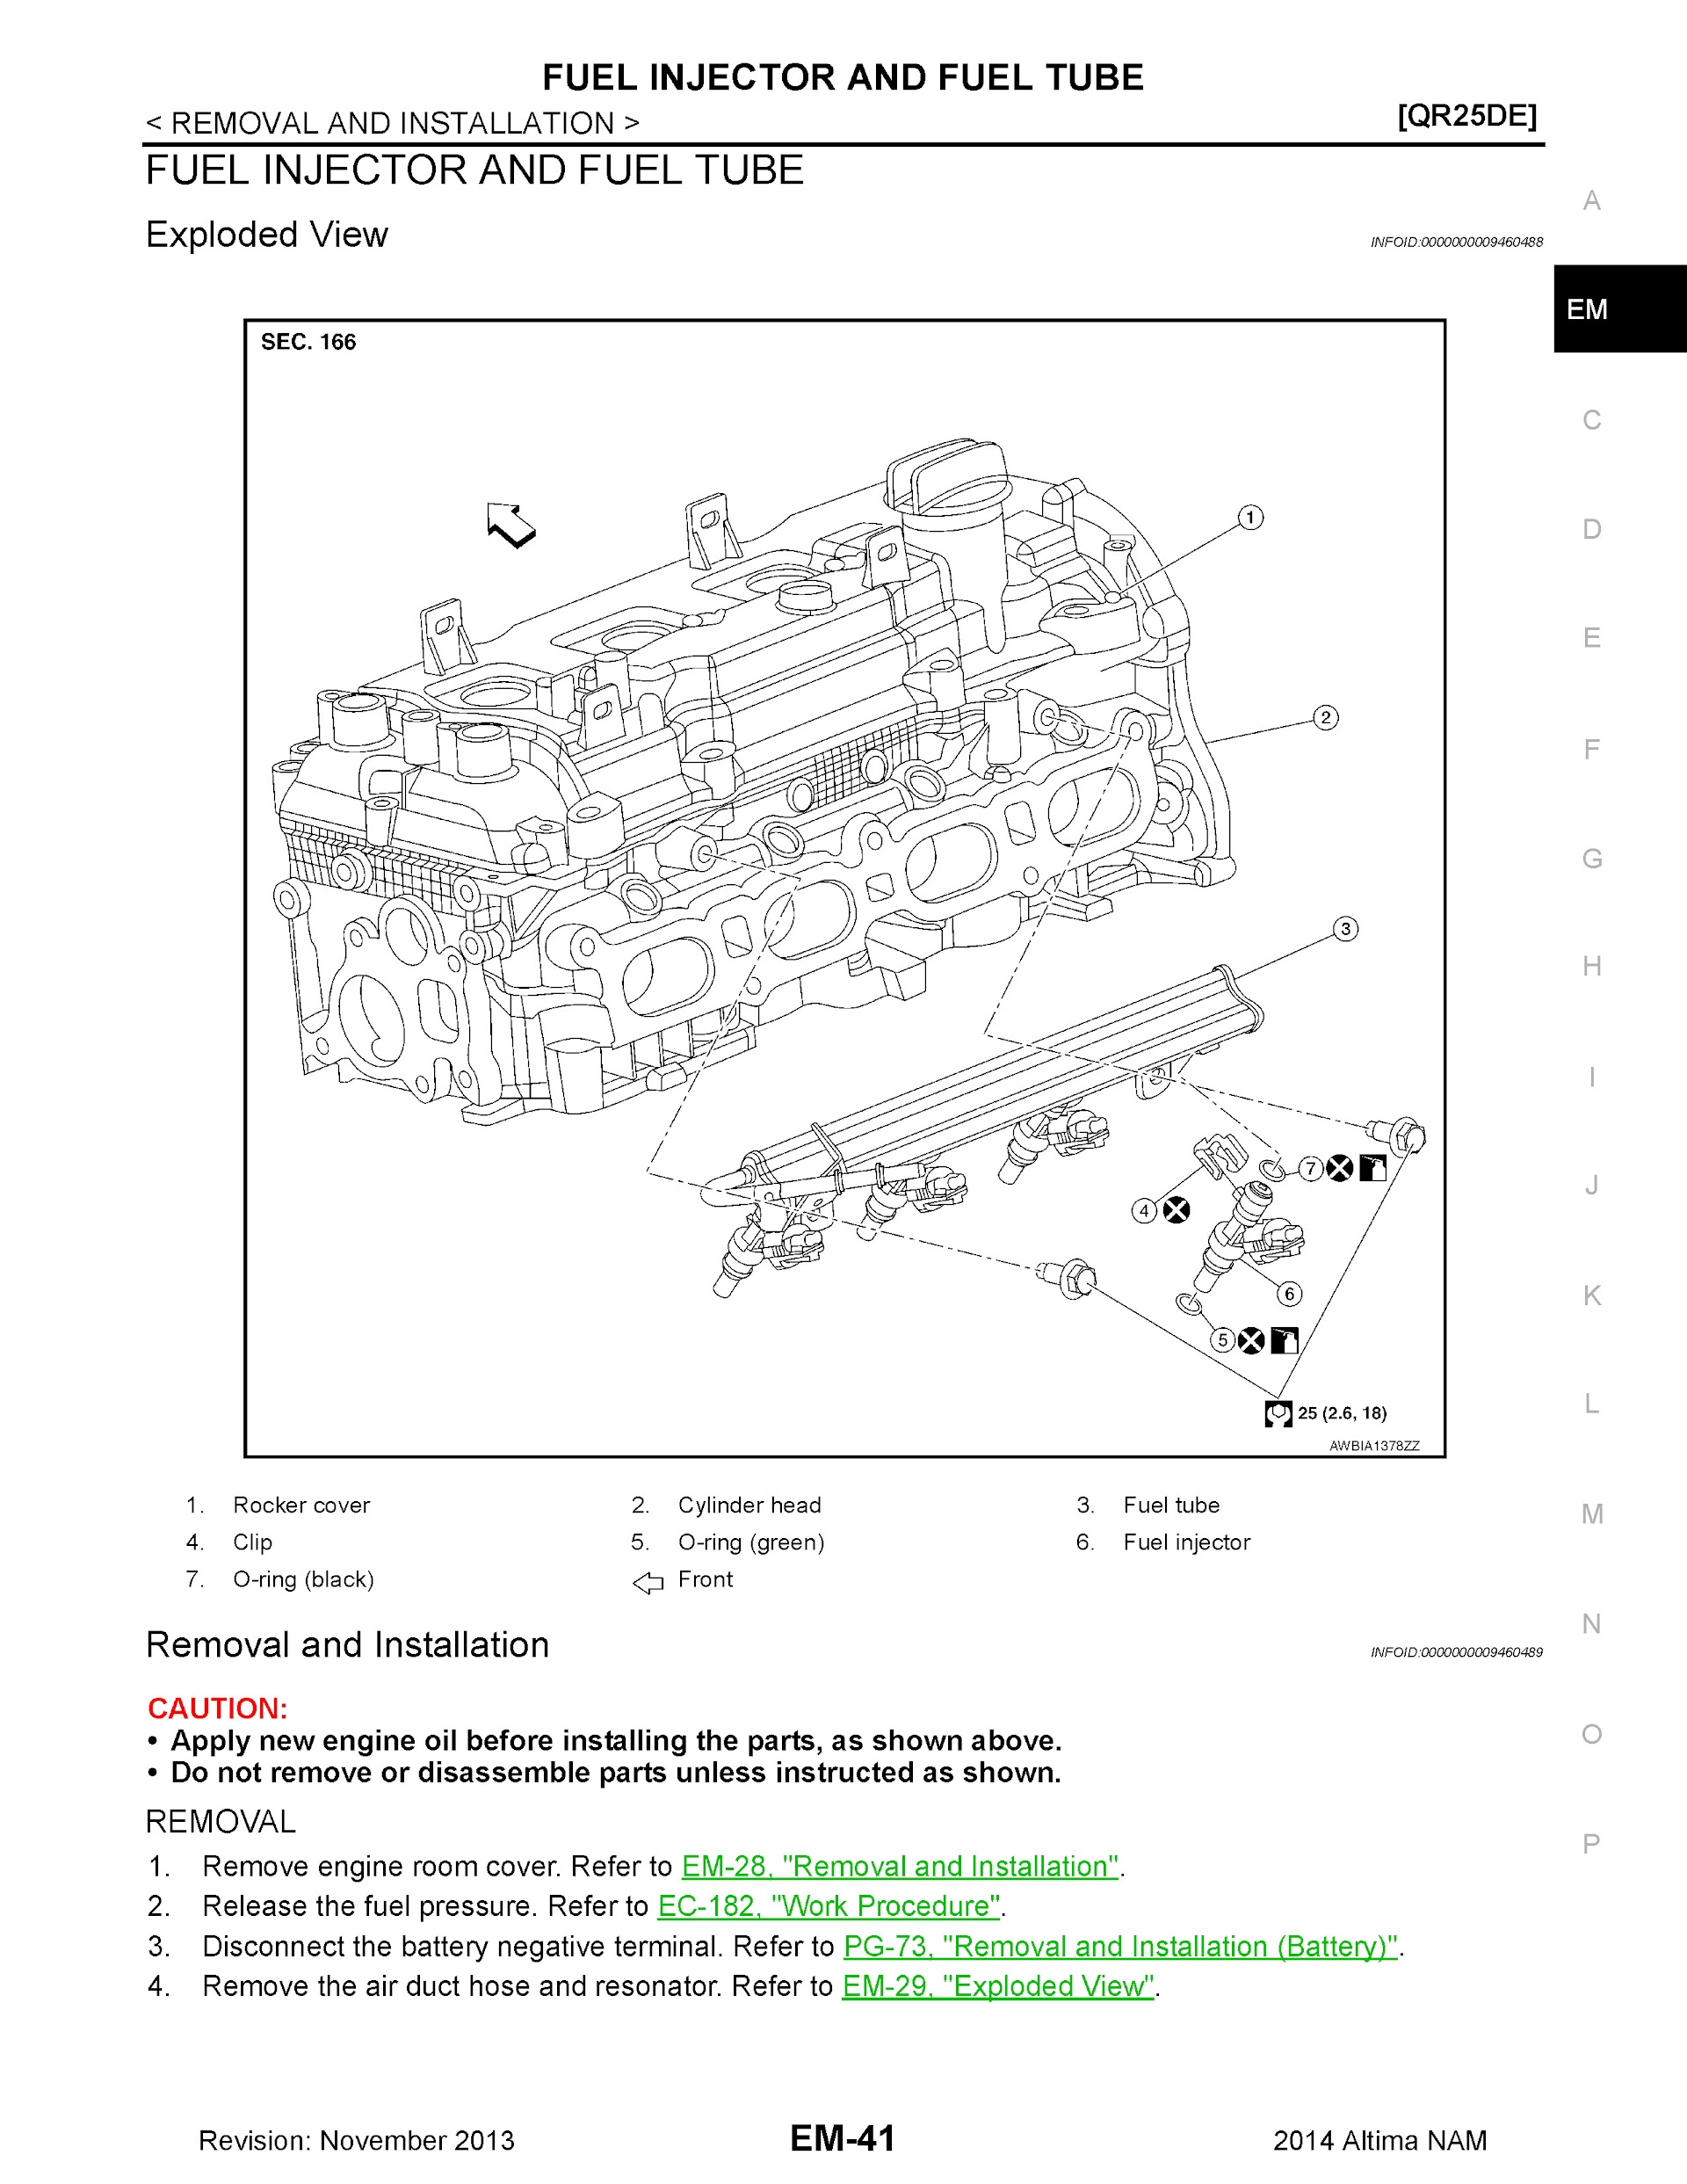 2014 Nissan Altima Repair Manual, Fule Injector and Fuel Tube Removal and Installation